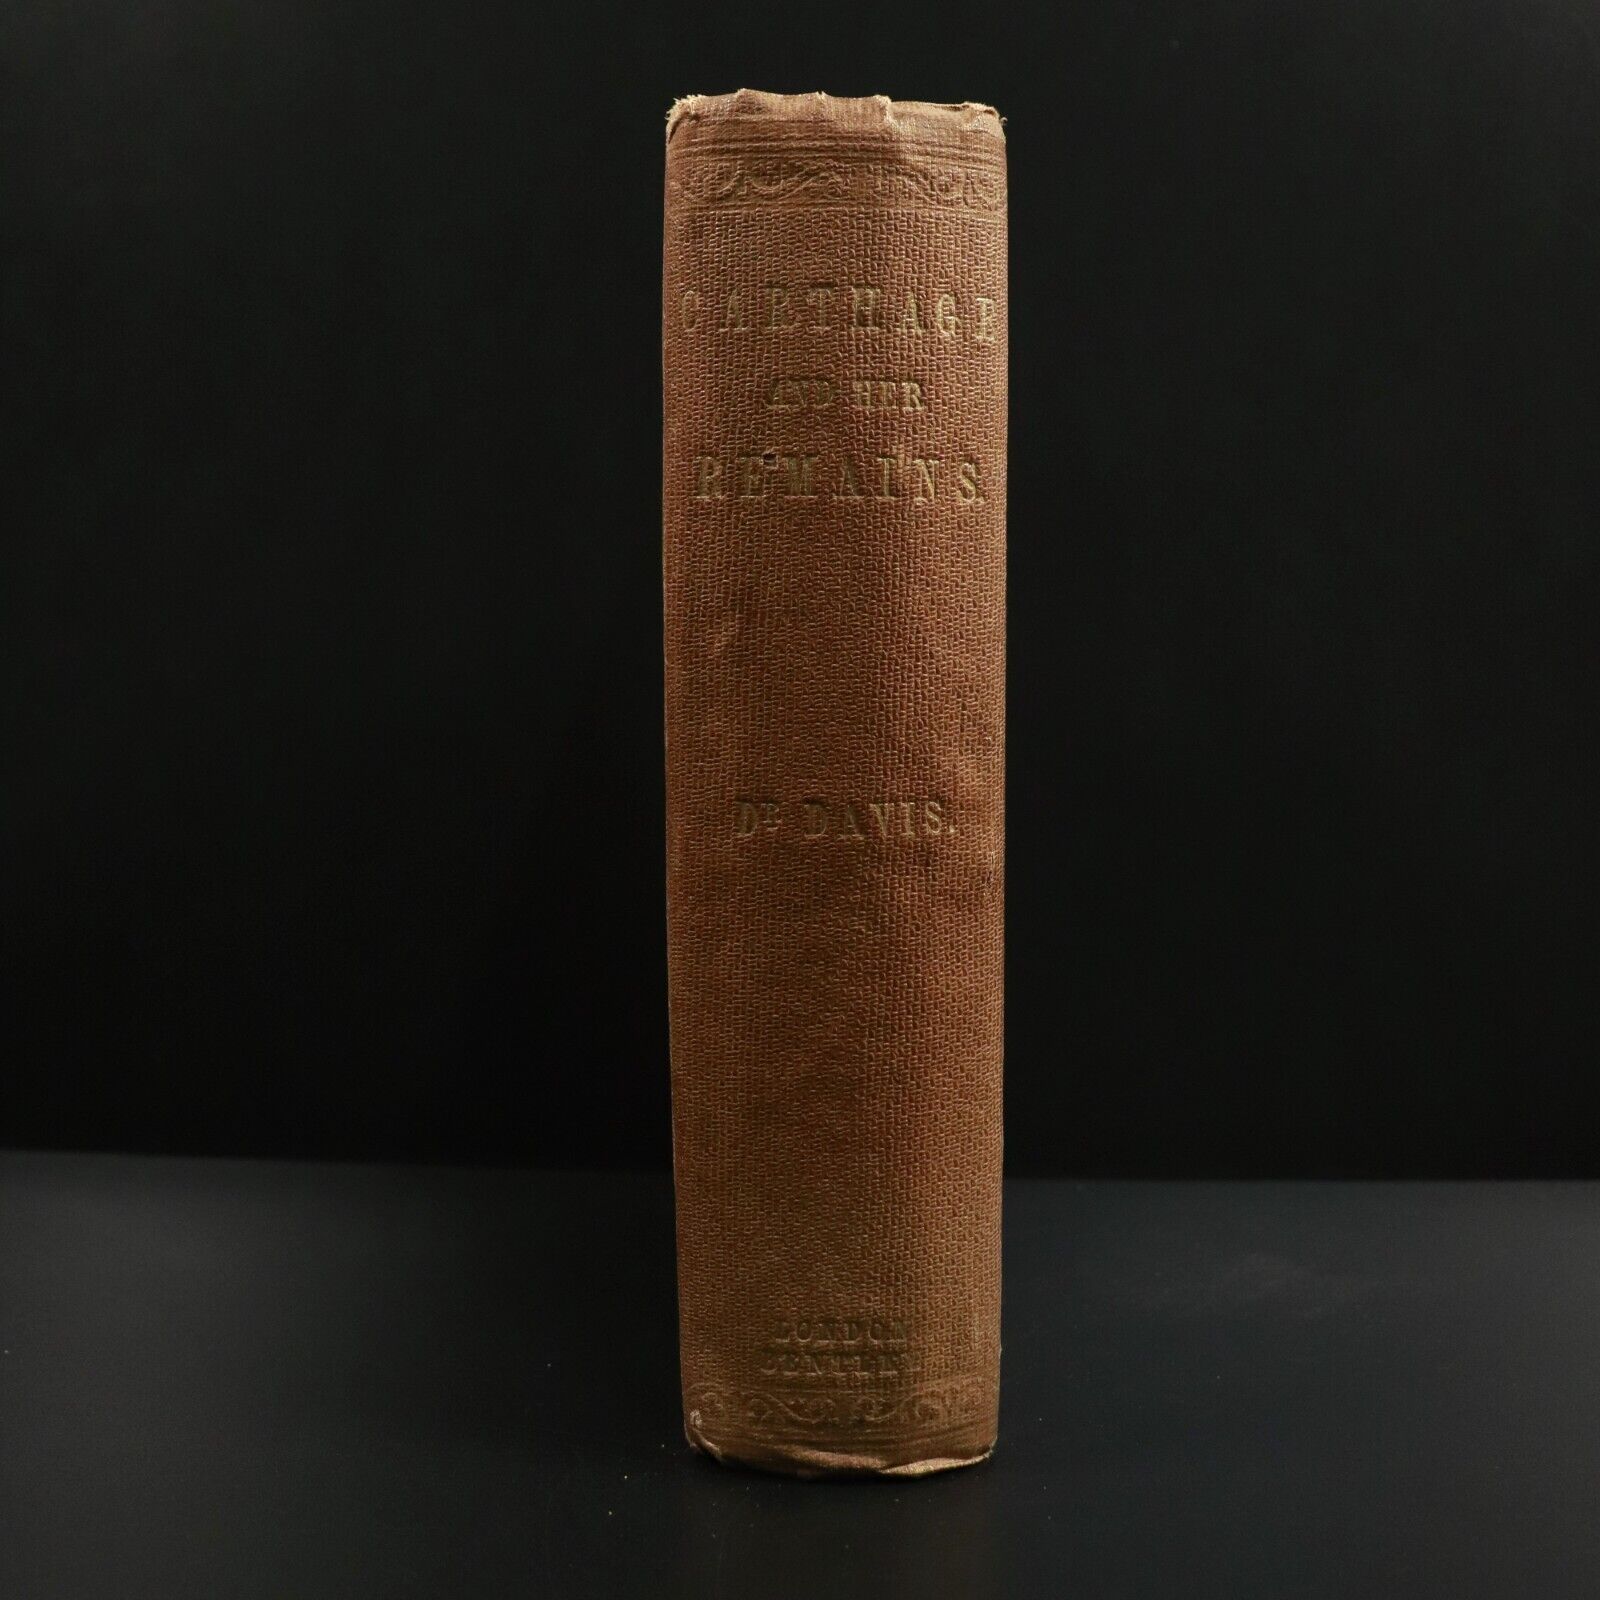 1861 Carthage & Her Remains by Dr N. Davis Antiquarian Exploration Book 1st Ed